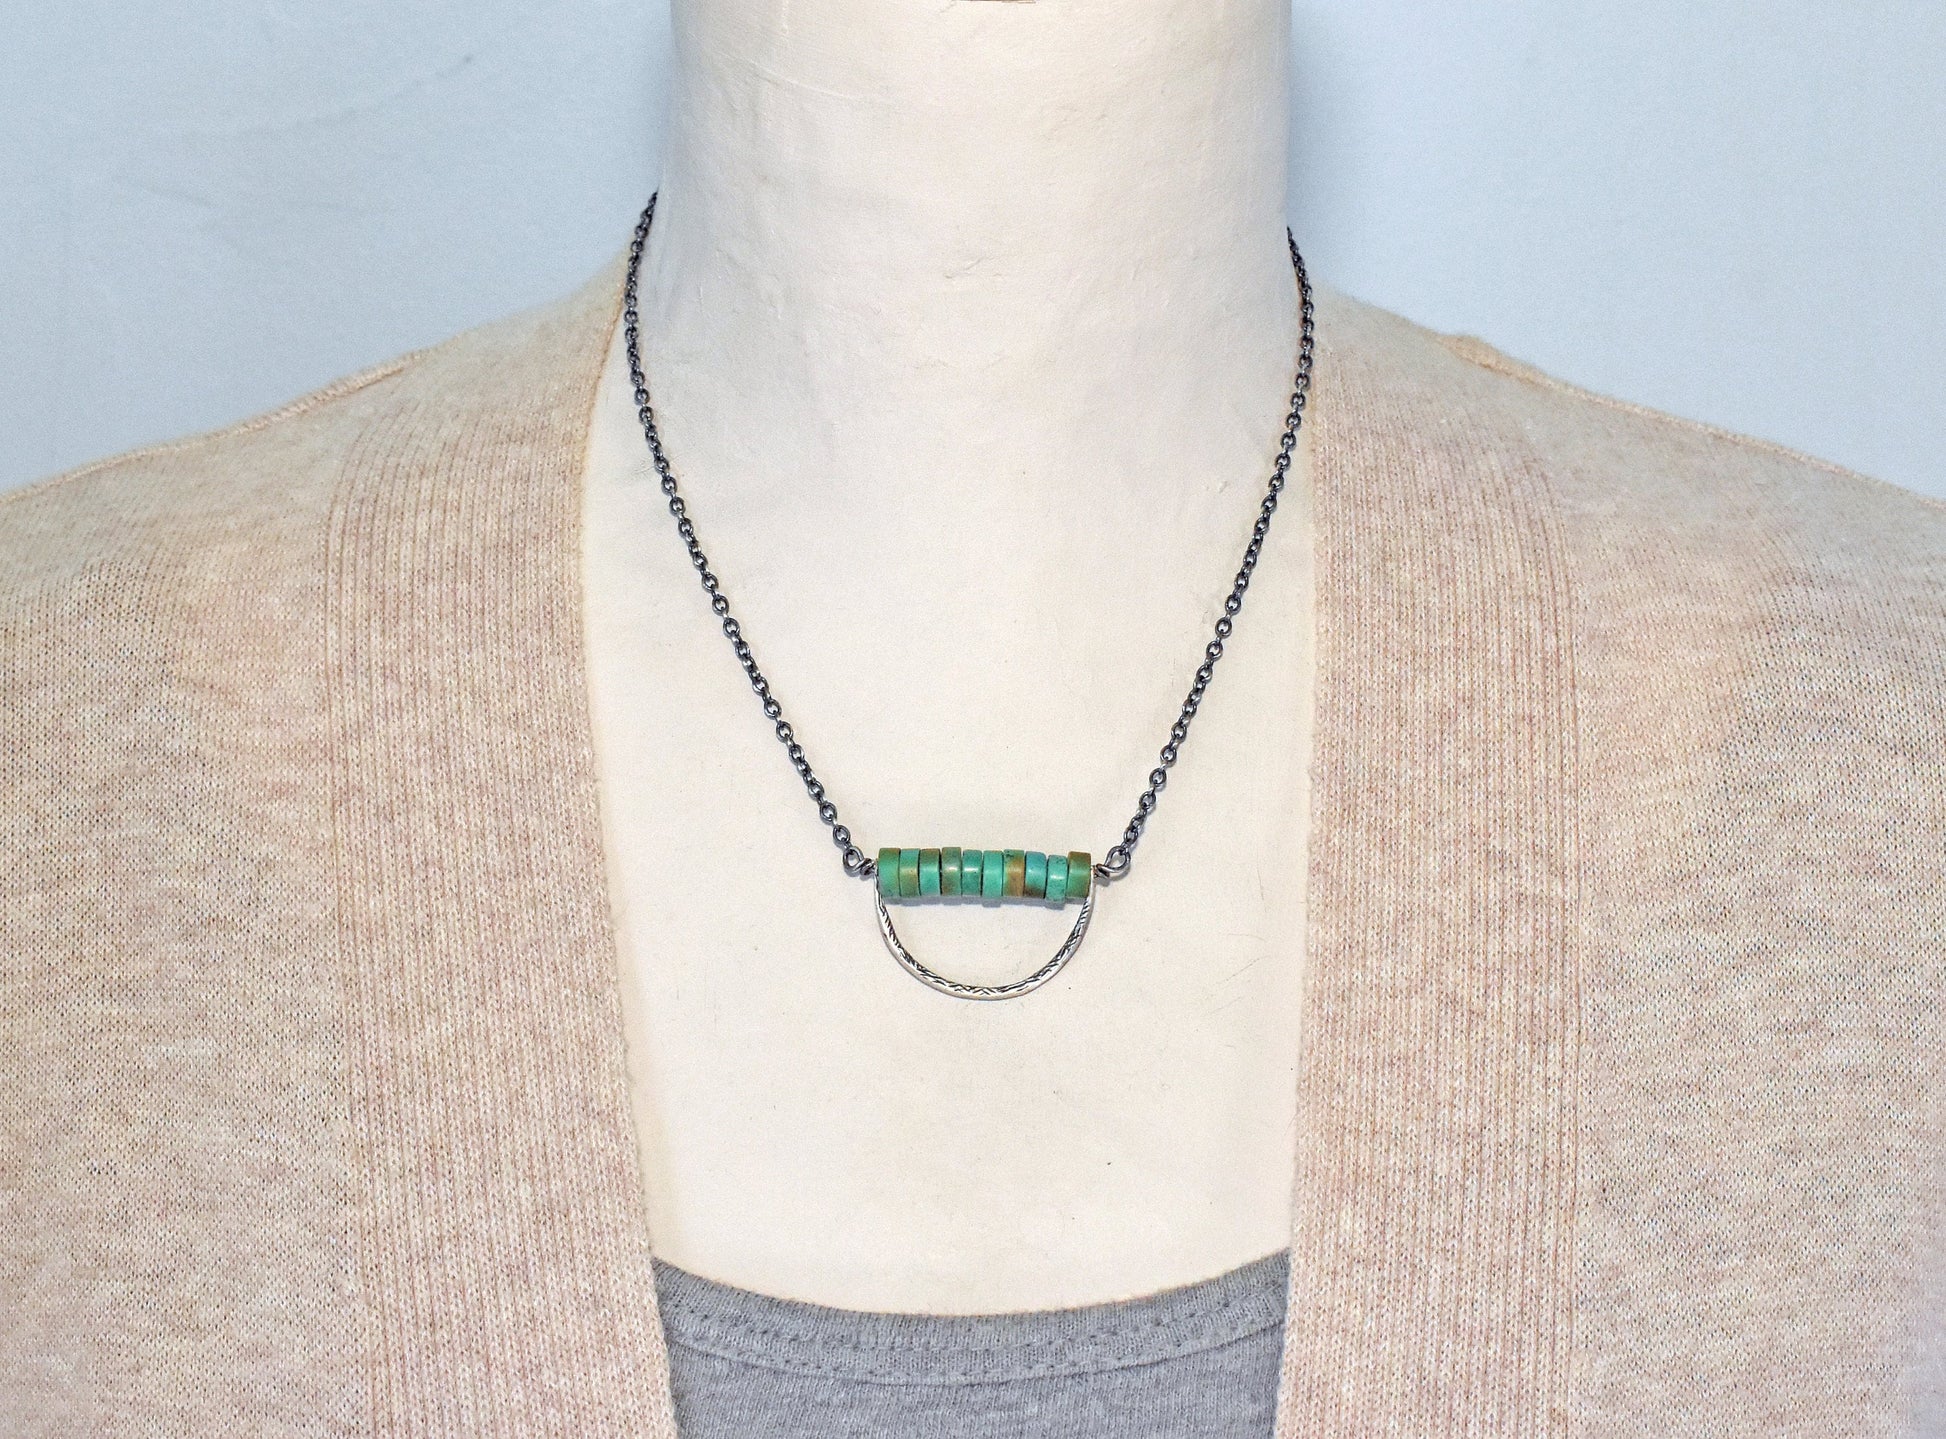 Simple Turquoise Sterling Silver Necklace, Unique Boho Style Jewelry, Artisan Handmade, Rusic Green Stone